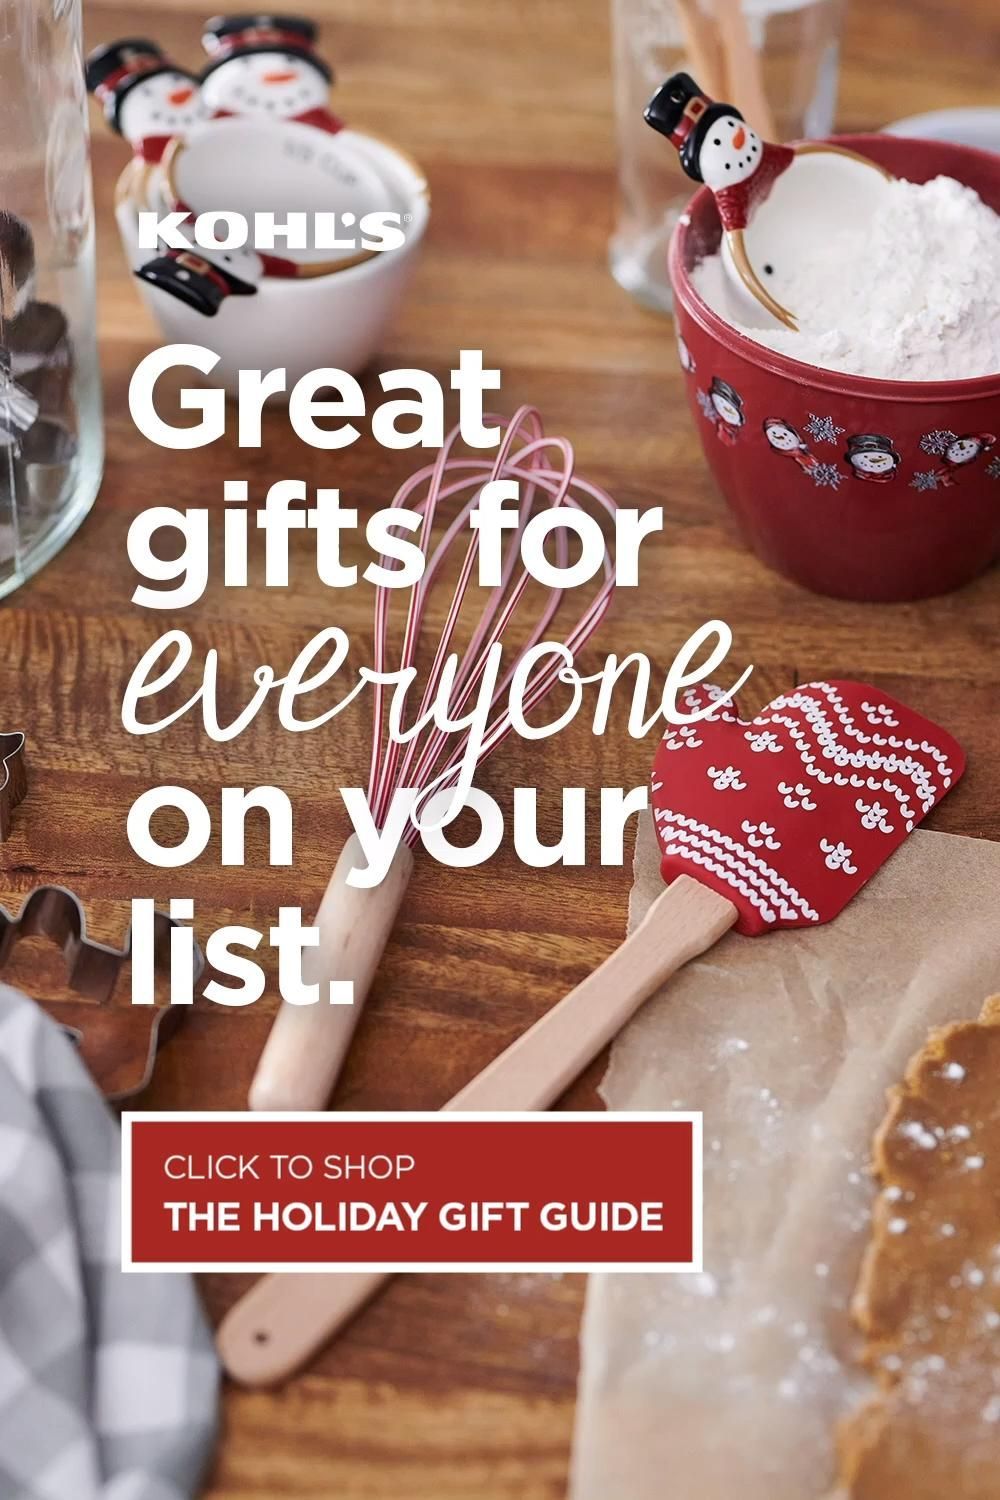 Find top holiday gifts at Kohl's. - Find top holiday gifts at Kohl's. -   18 homemade food gifts for xmas ideas